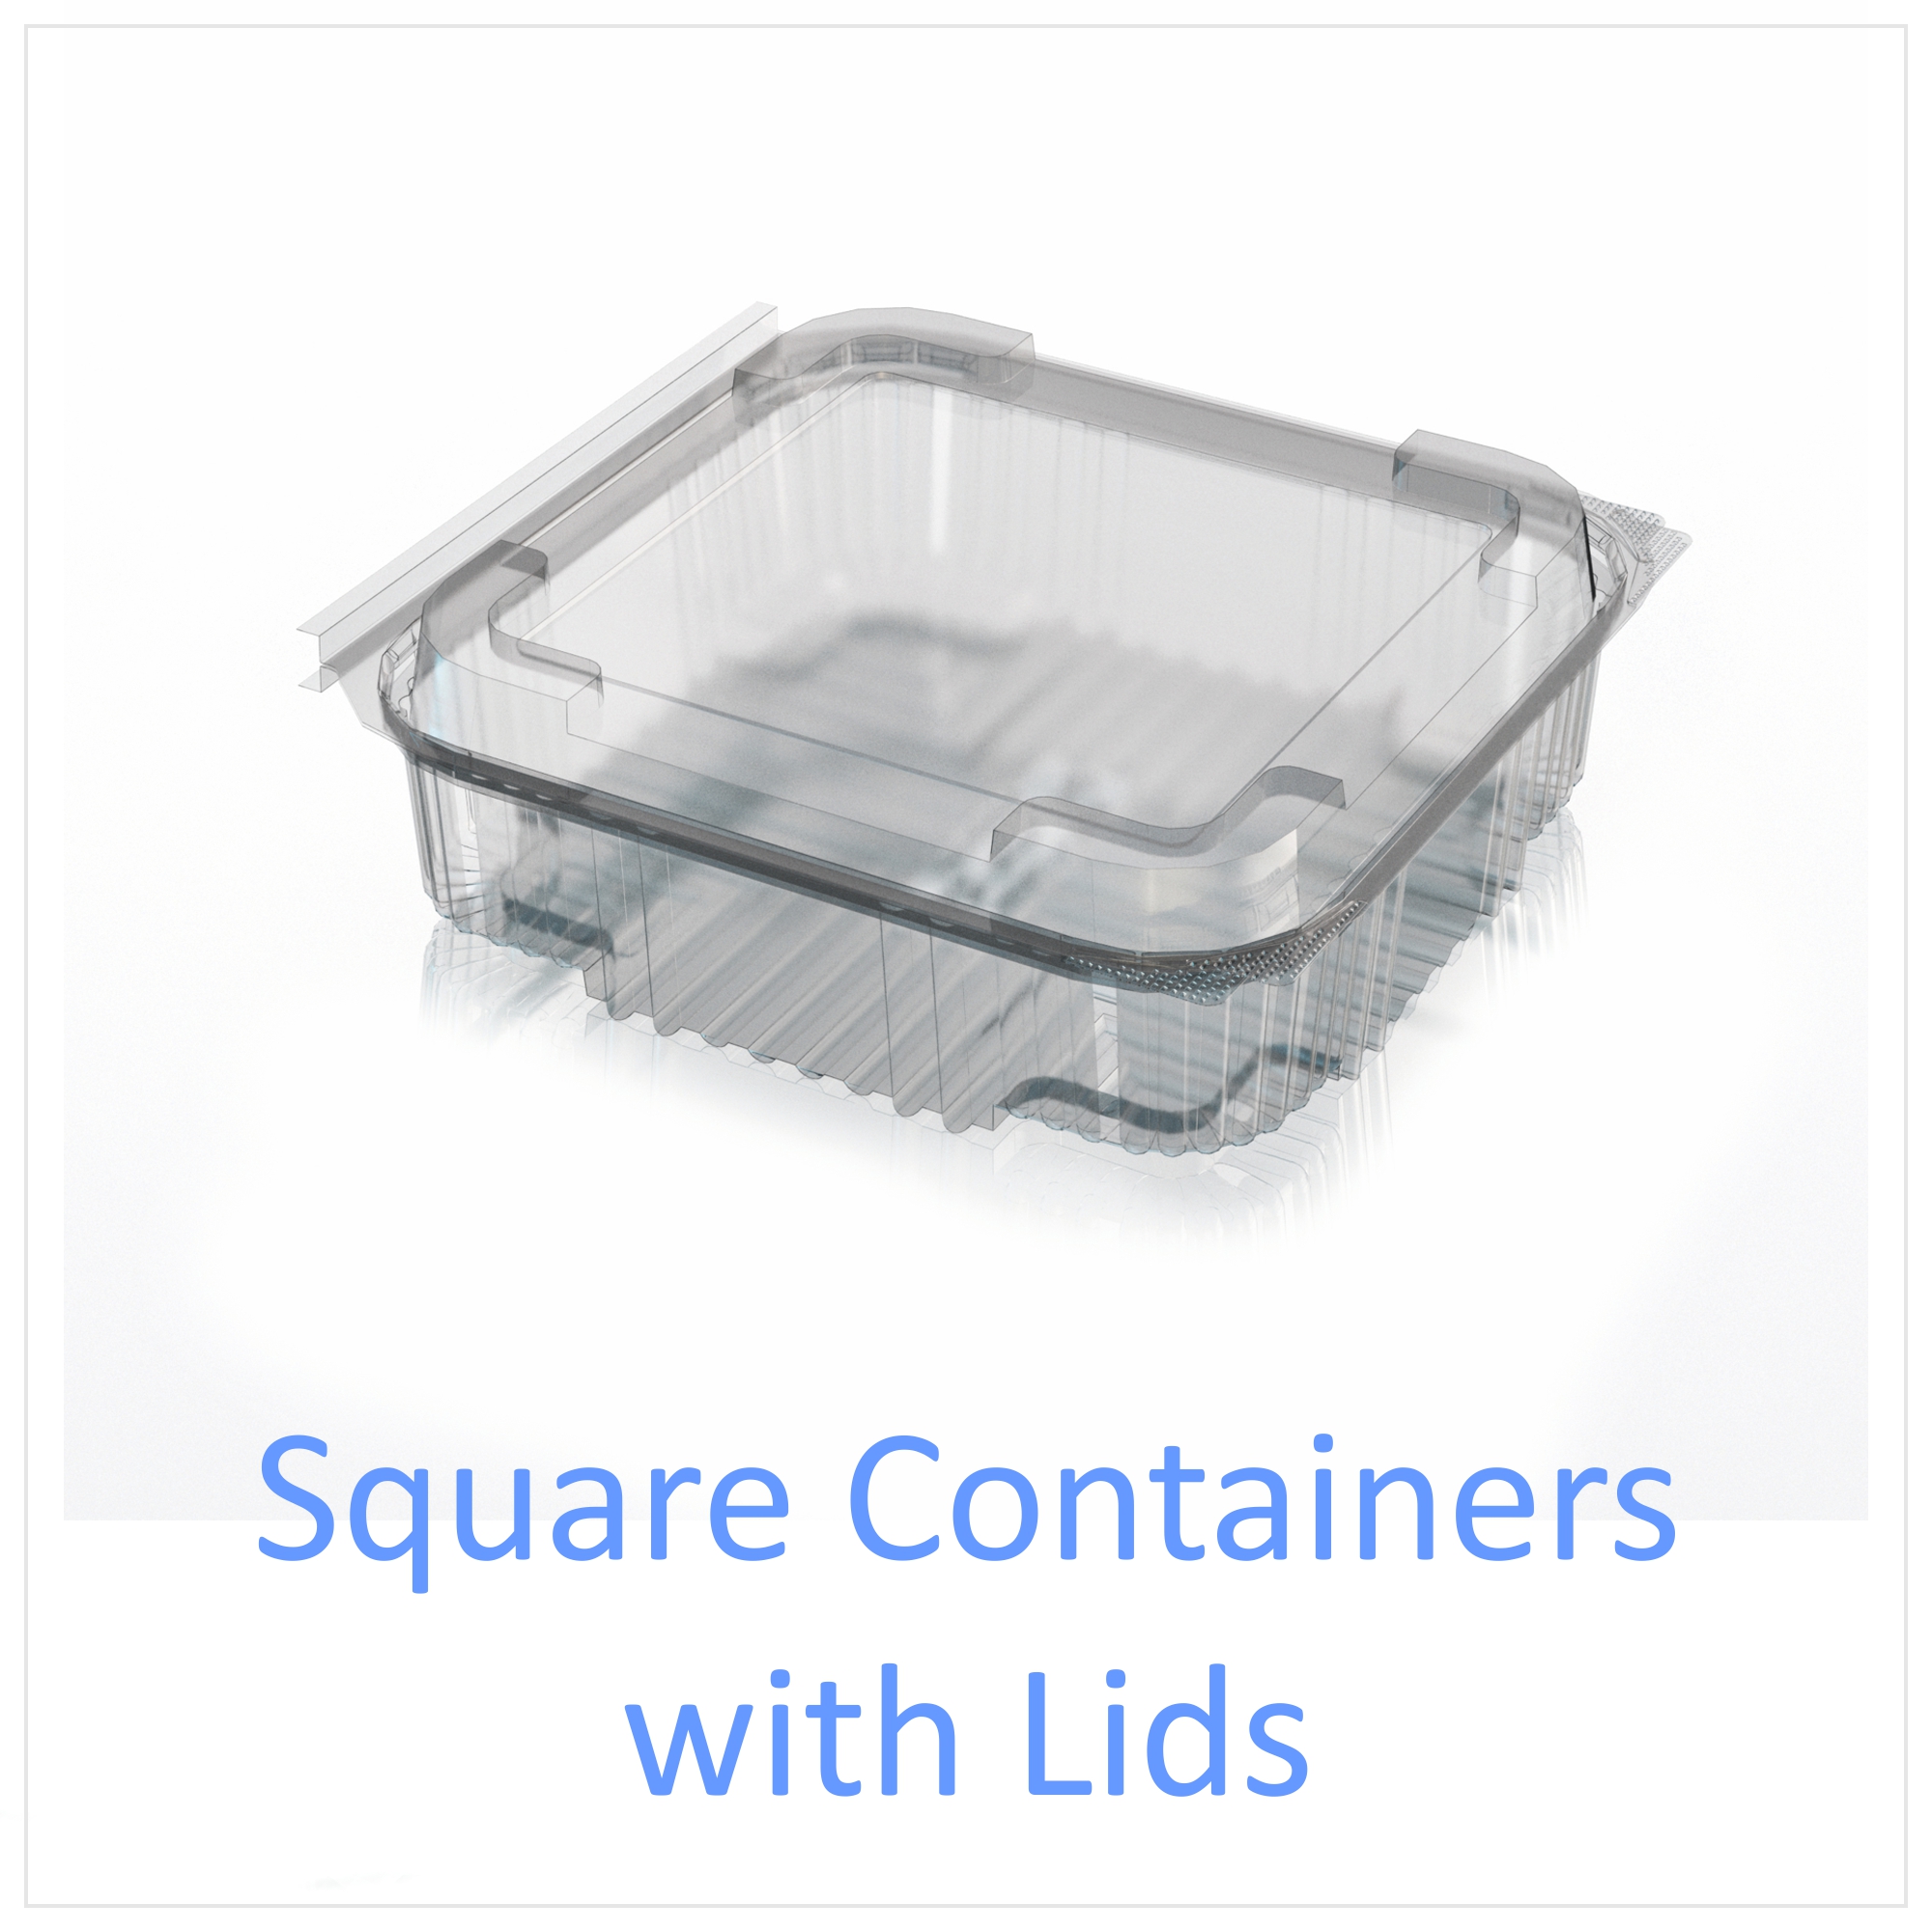 Square Containers with Lids